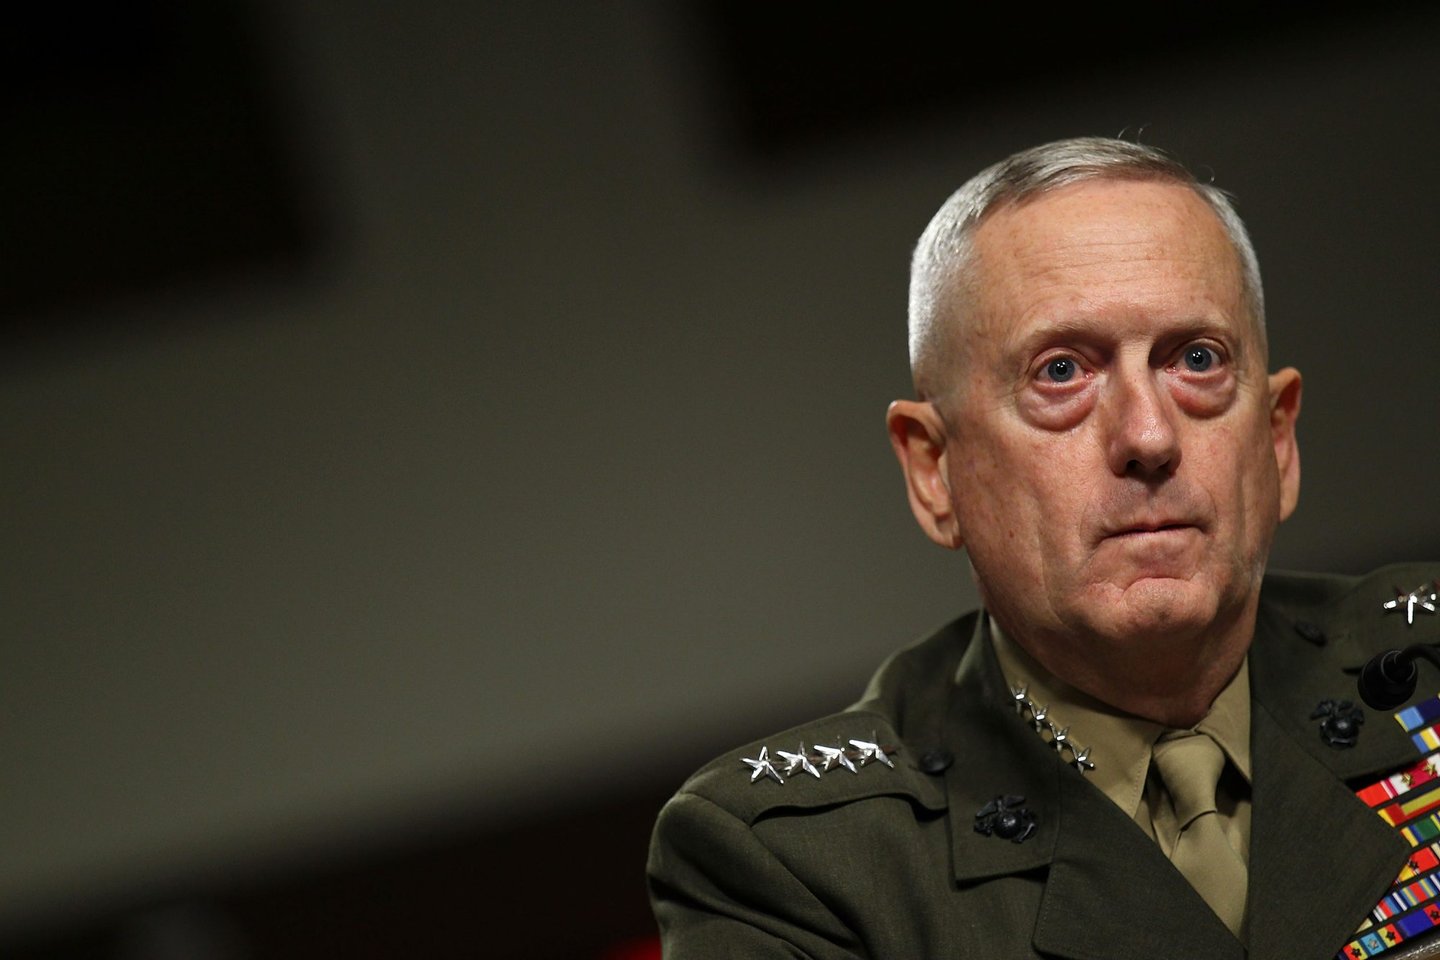 WASHINGTON - JULY 27: Marine Corps Gen. James Mattis listens during his confirmation hearing July 27, 2010 on Capitol Hill in Washington, DC. Mattis will become the next commander of the U.S. Central Command replacing the position held by Army Gen. David Petraeus if confirmed by the Senate. (Photo by Alex Wong/Getty Images)